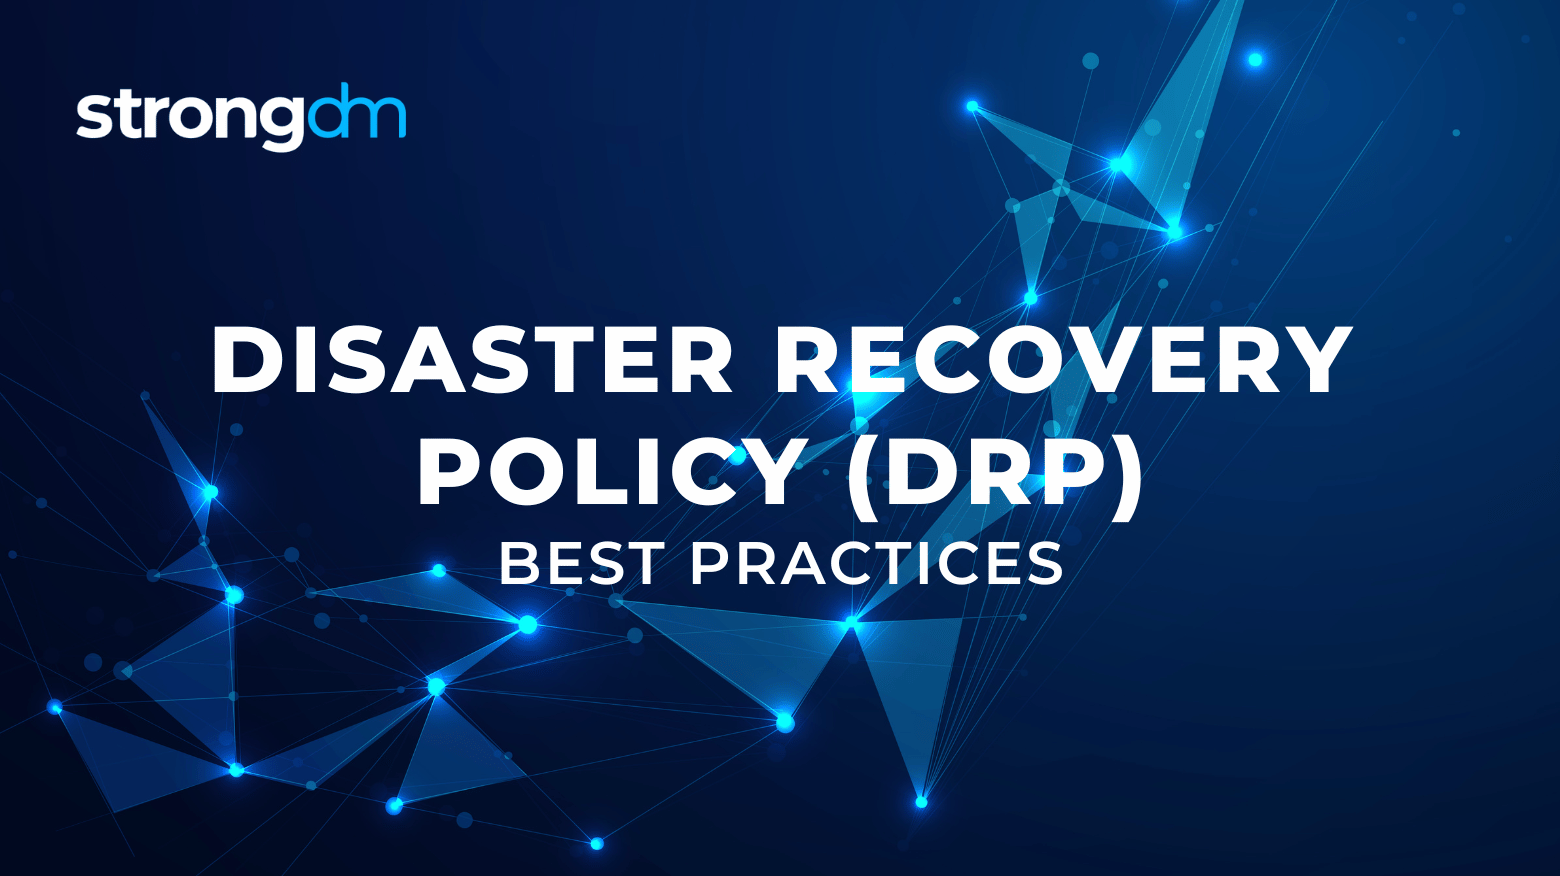 5 Disaster Recovery Policy (DRP) Best Practices to Know